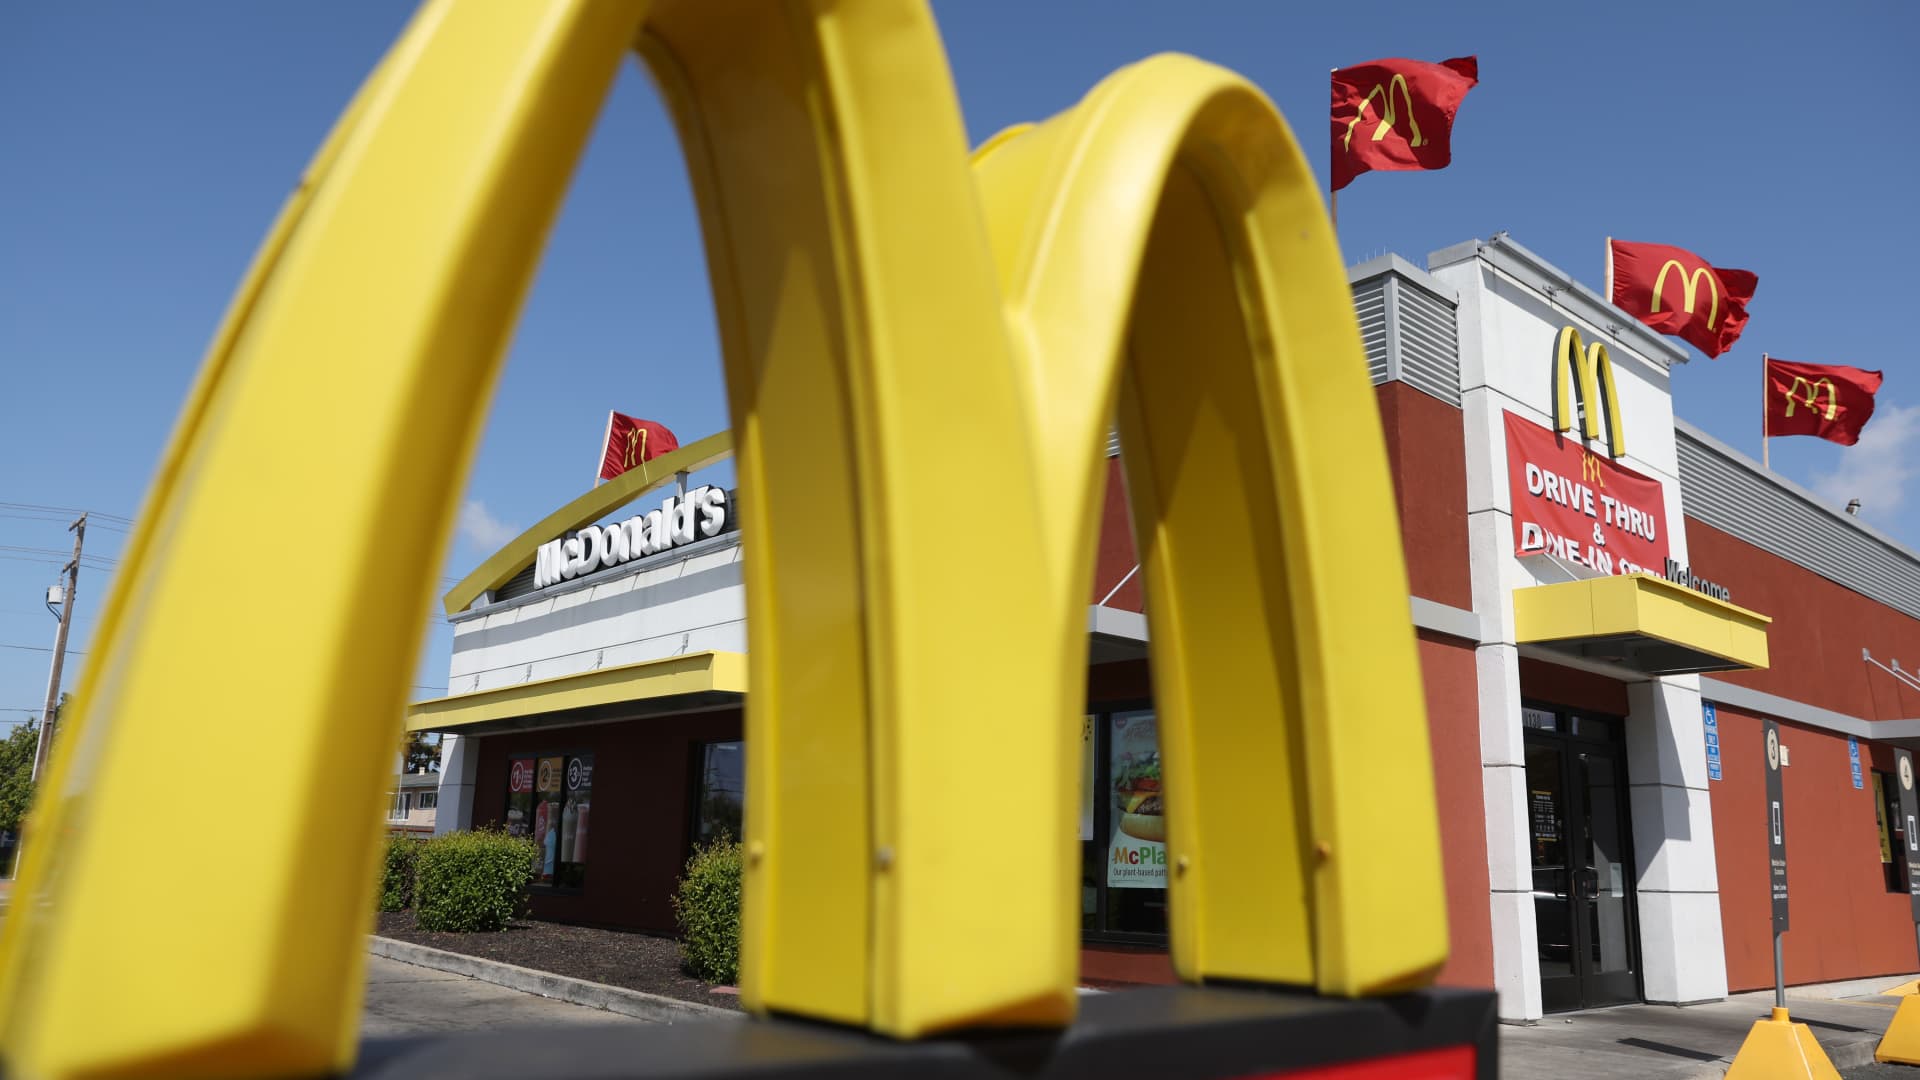 McDonald’s is about to report its earnings. Here’s what to expect